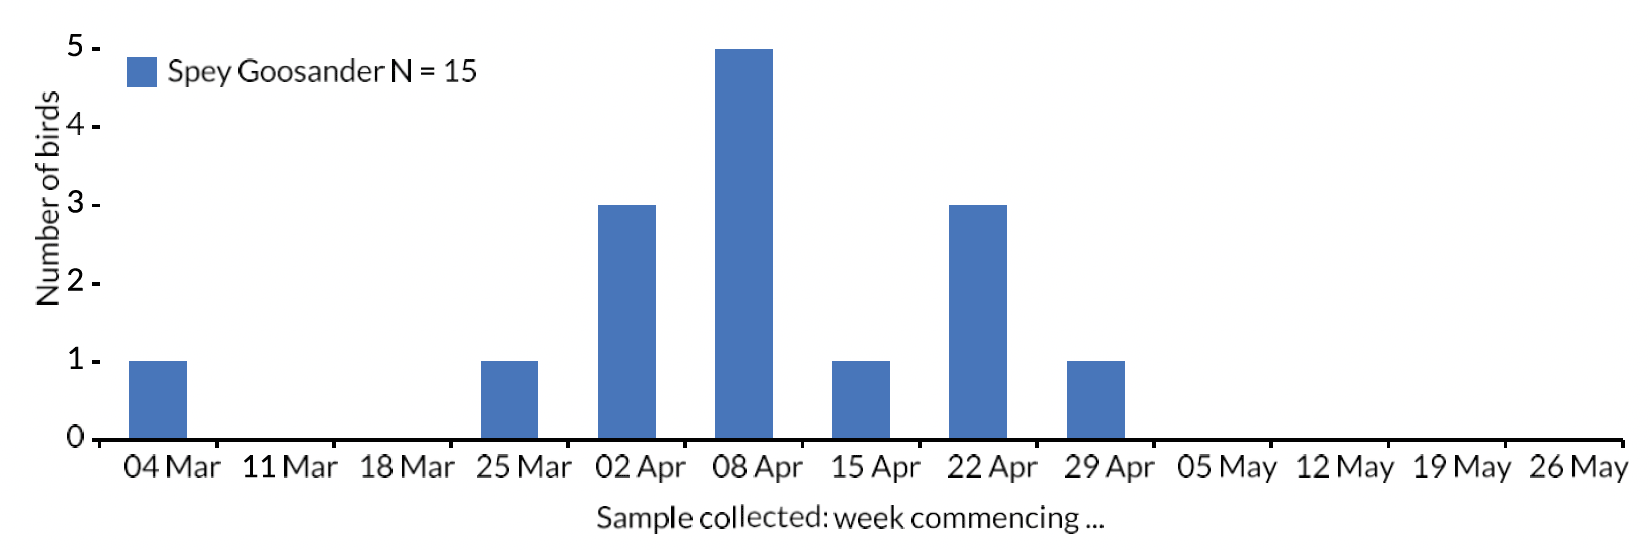 Bar chart of the number of River Spey Goosanders collected each week during the 2019 smolt run period.